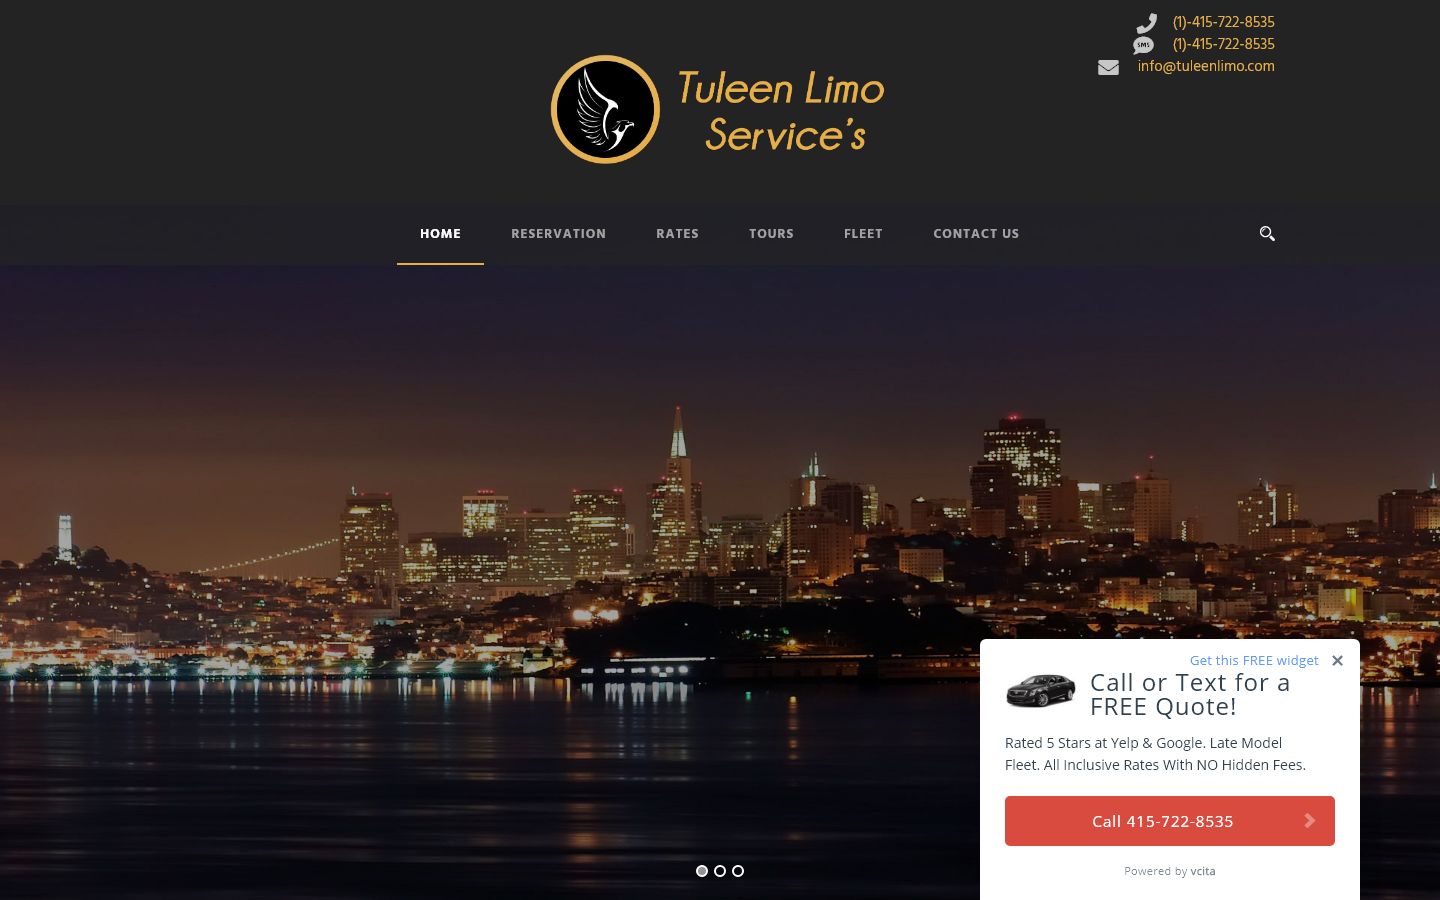 Tuleen Limo Services